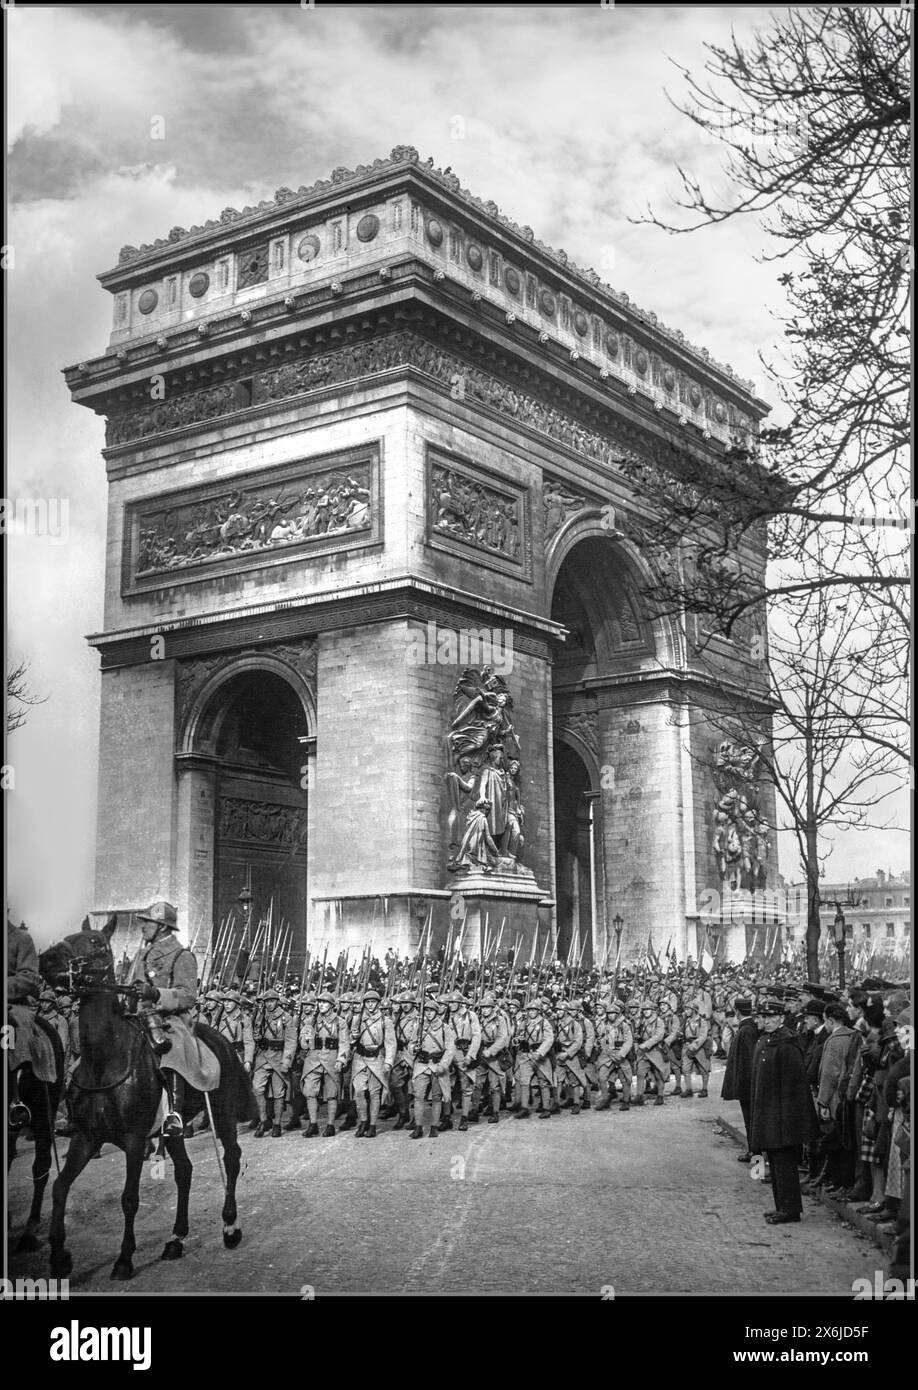 WW1 Armistice Paris Fetes de Armistice 1926 Arc de Triomphe Paris France. The Armistice of 11 November 1918 was the armistice signed at Le Francport near Compiègne that ended fighting on land, at sea, and in the air in World War I between the Entente and their last remaining opponent, Germany Stock Photo